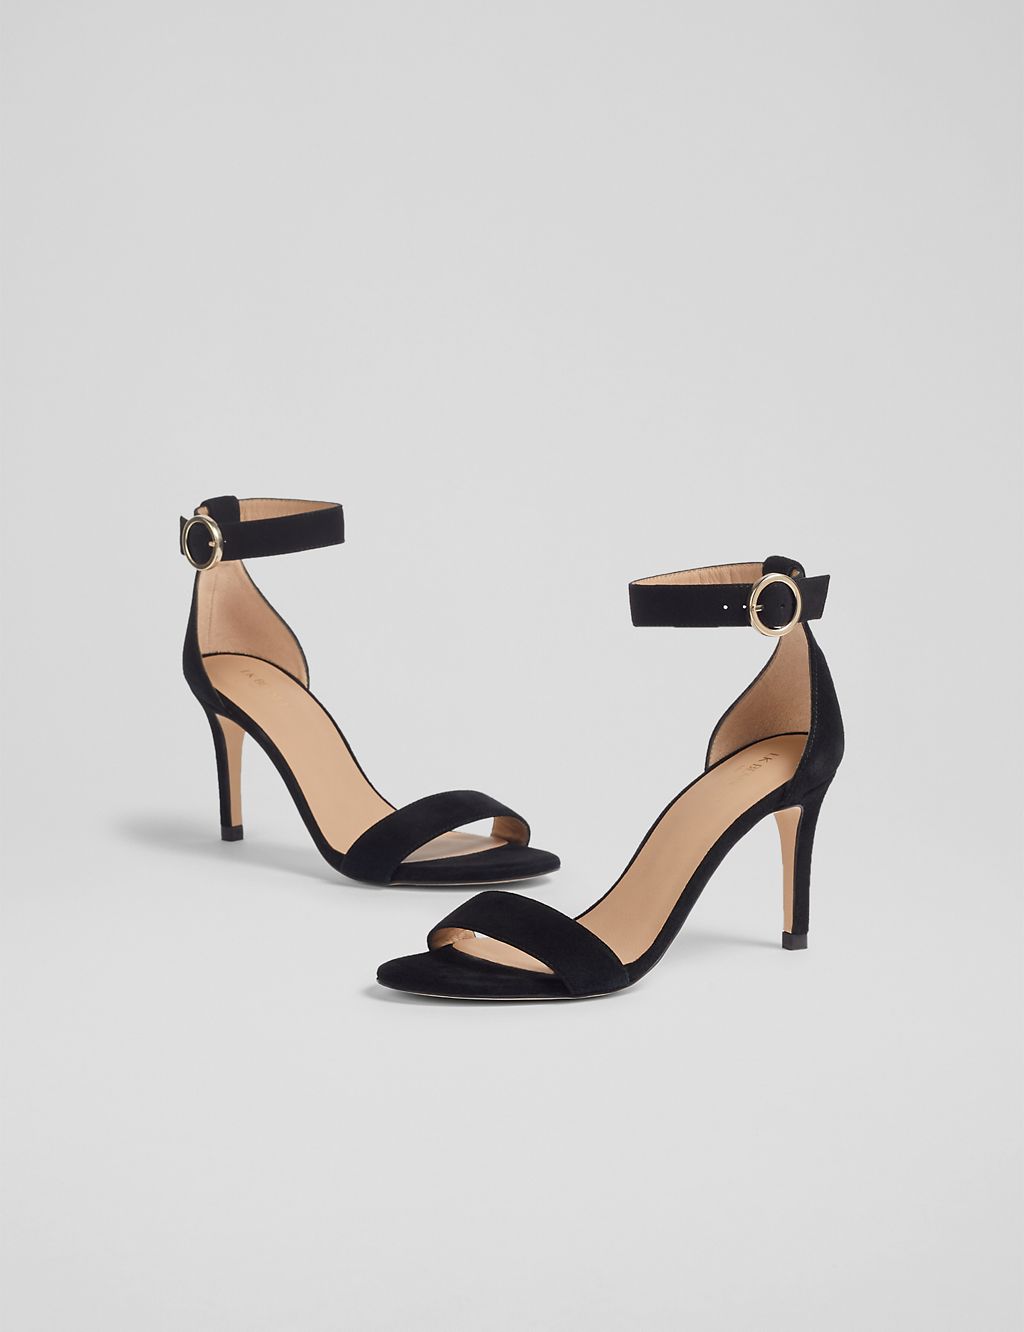 Suede Buckle Ankle Strap Stiletto Heel Sandals 2 of 4